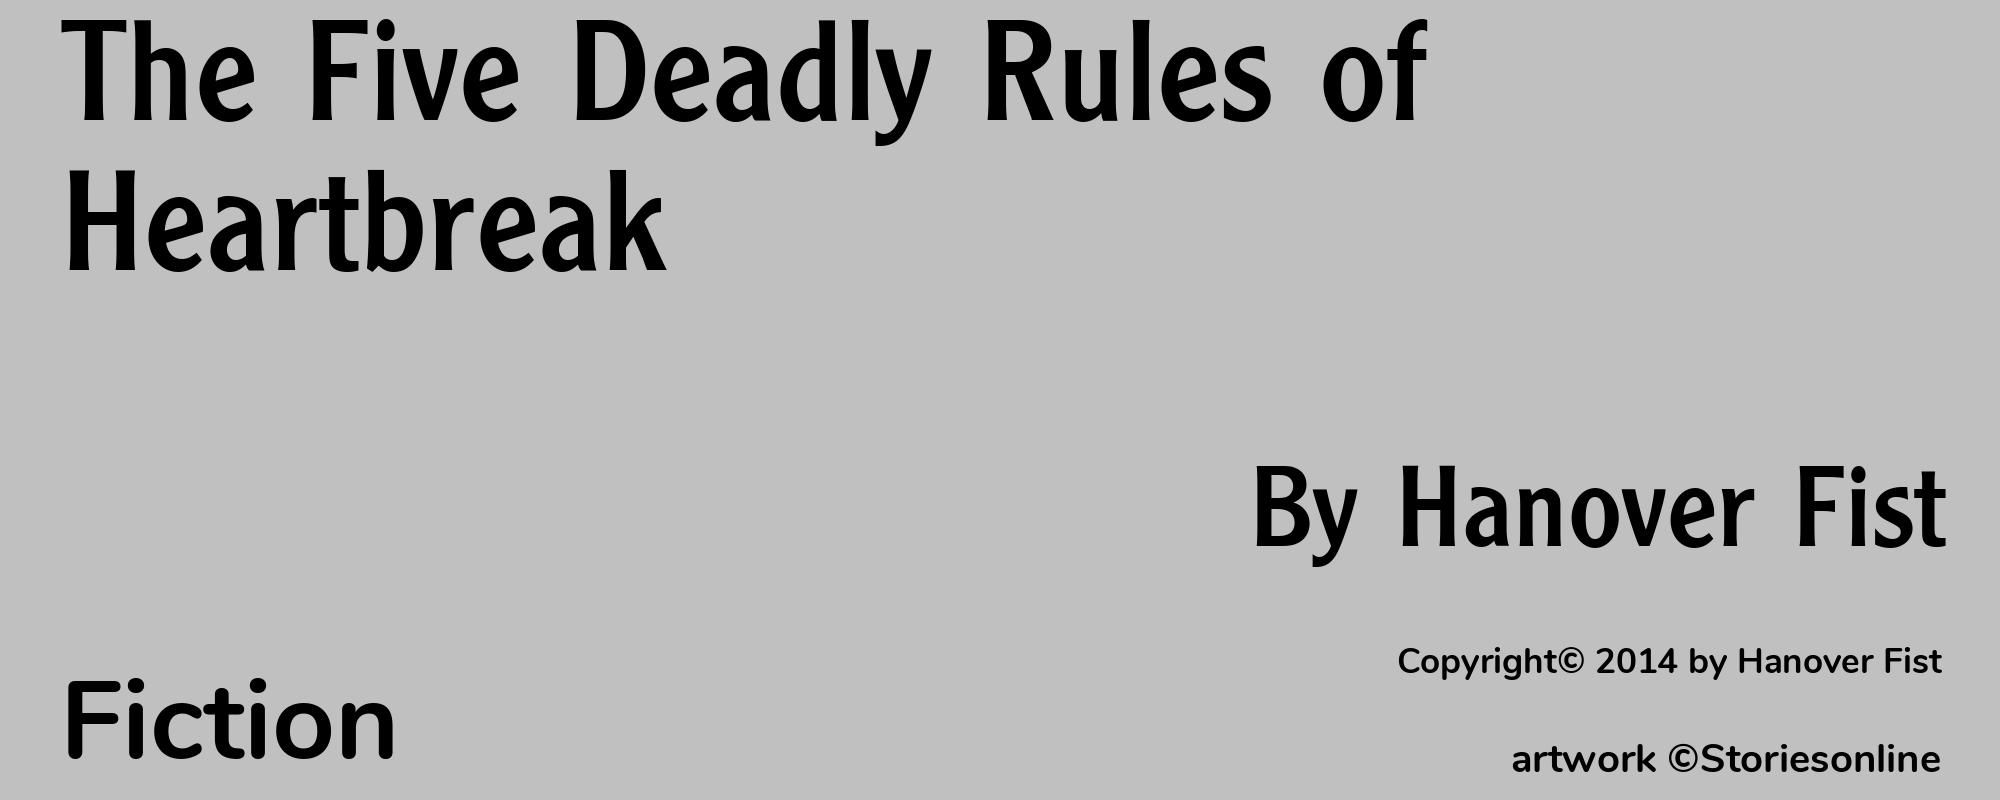 The Five Deadly Rules of Heartbreak - Cover